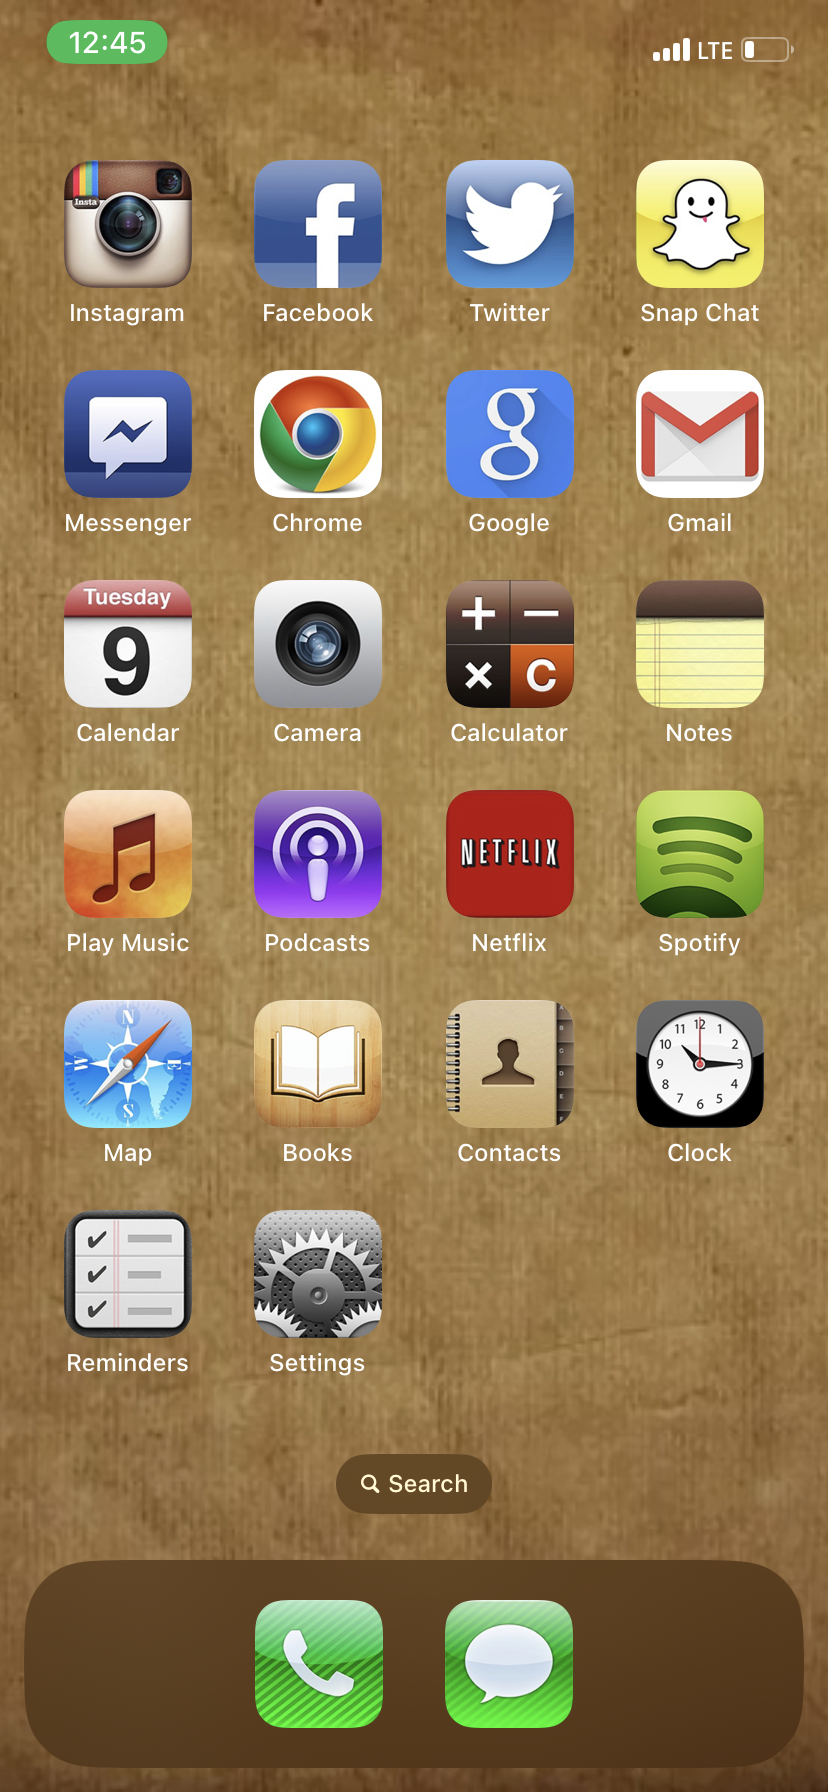 An iPhone home screen with retro icons and a brown background